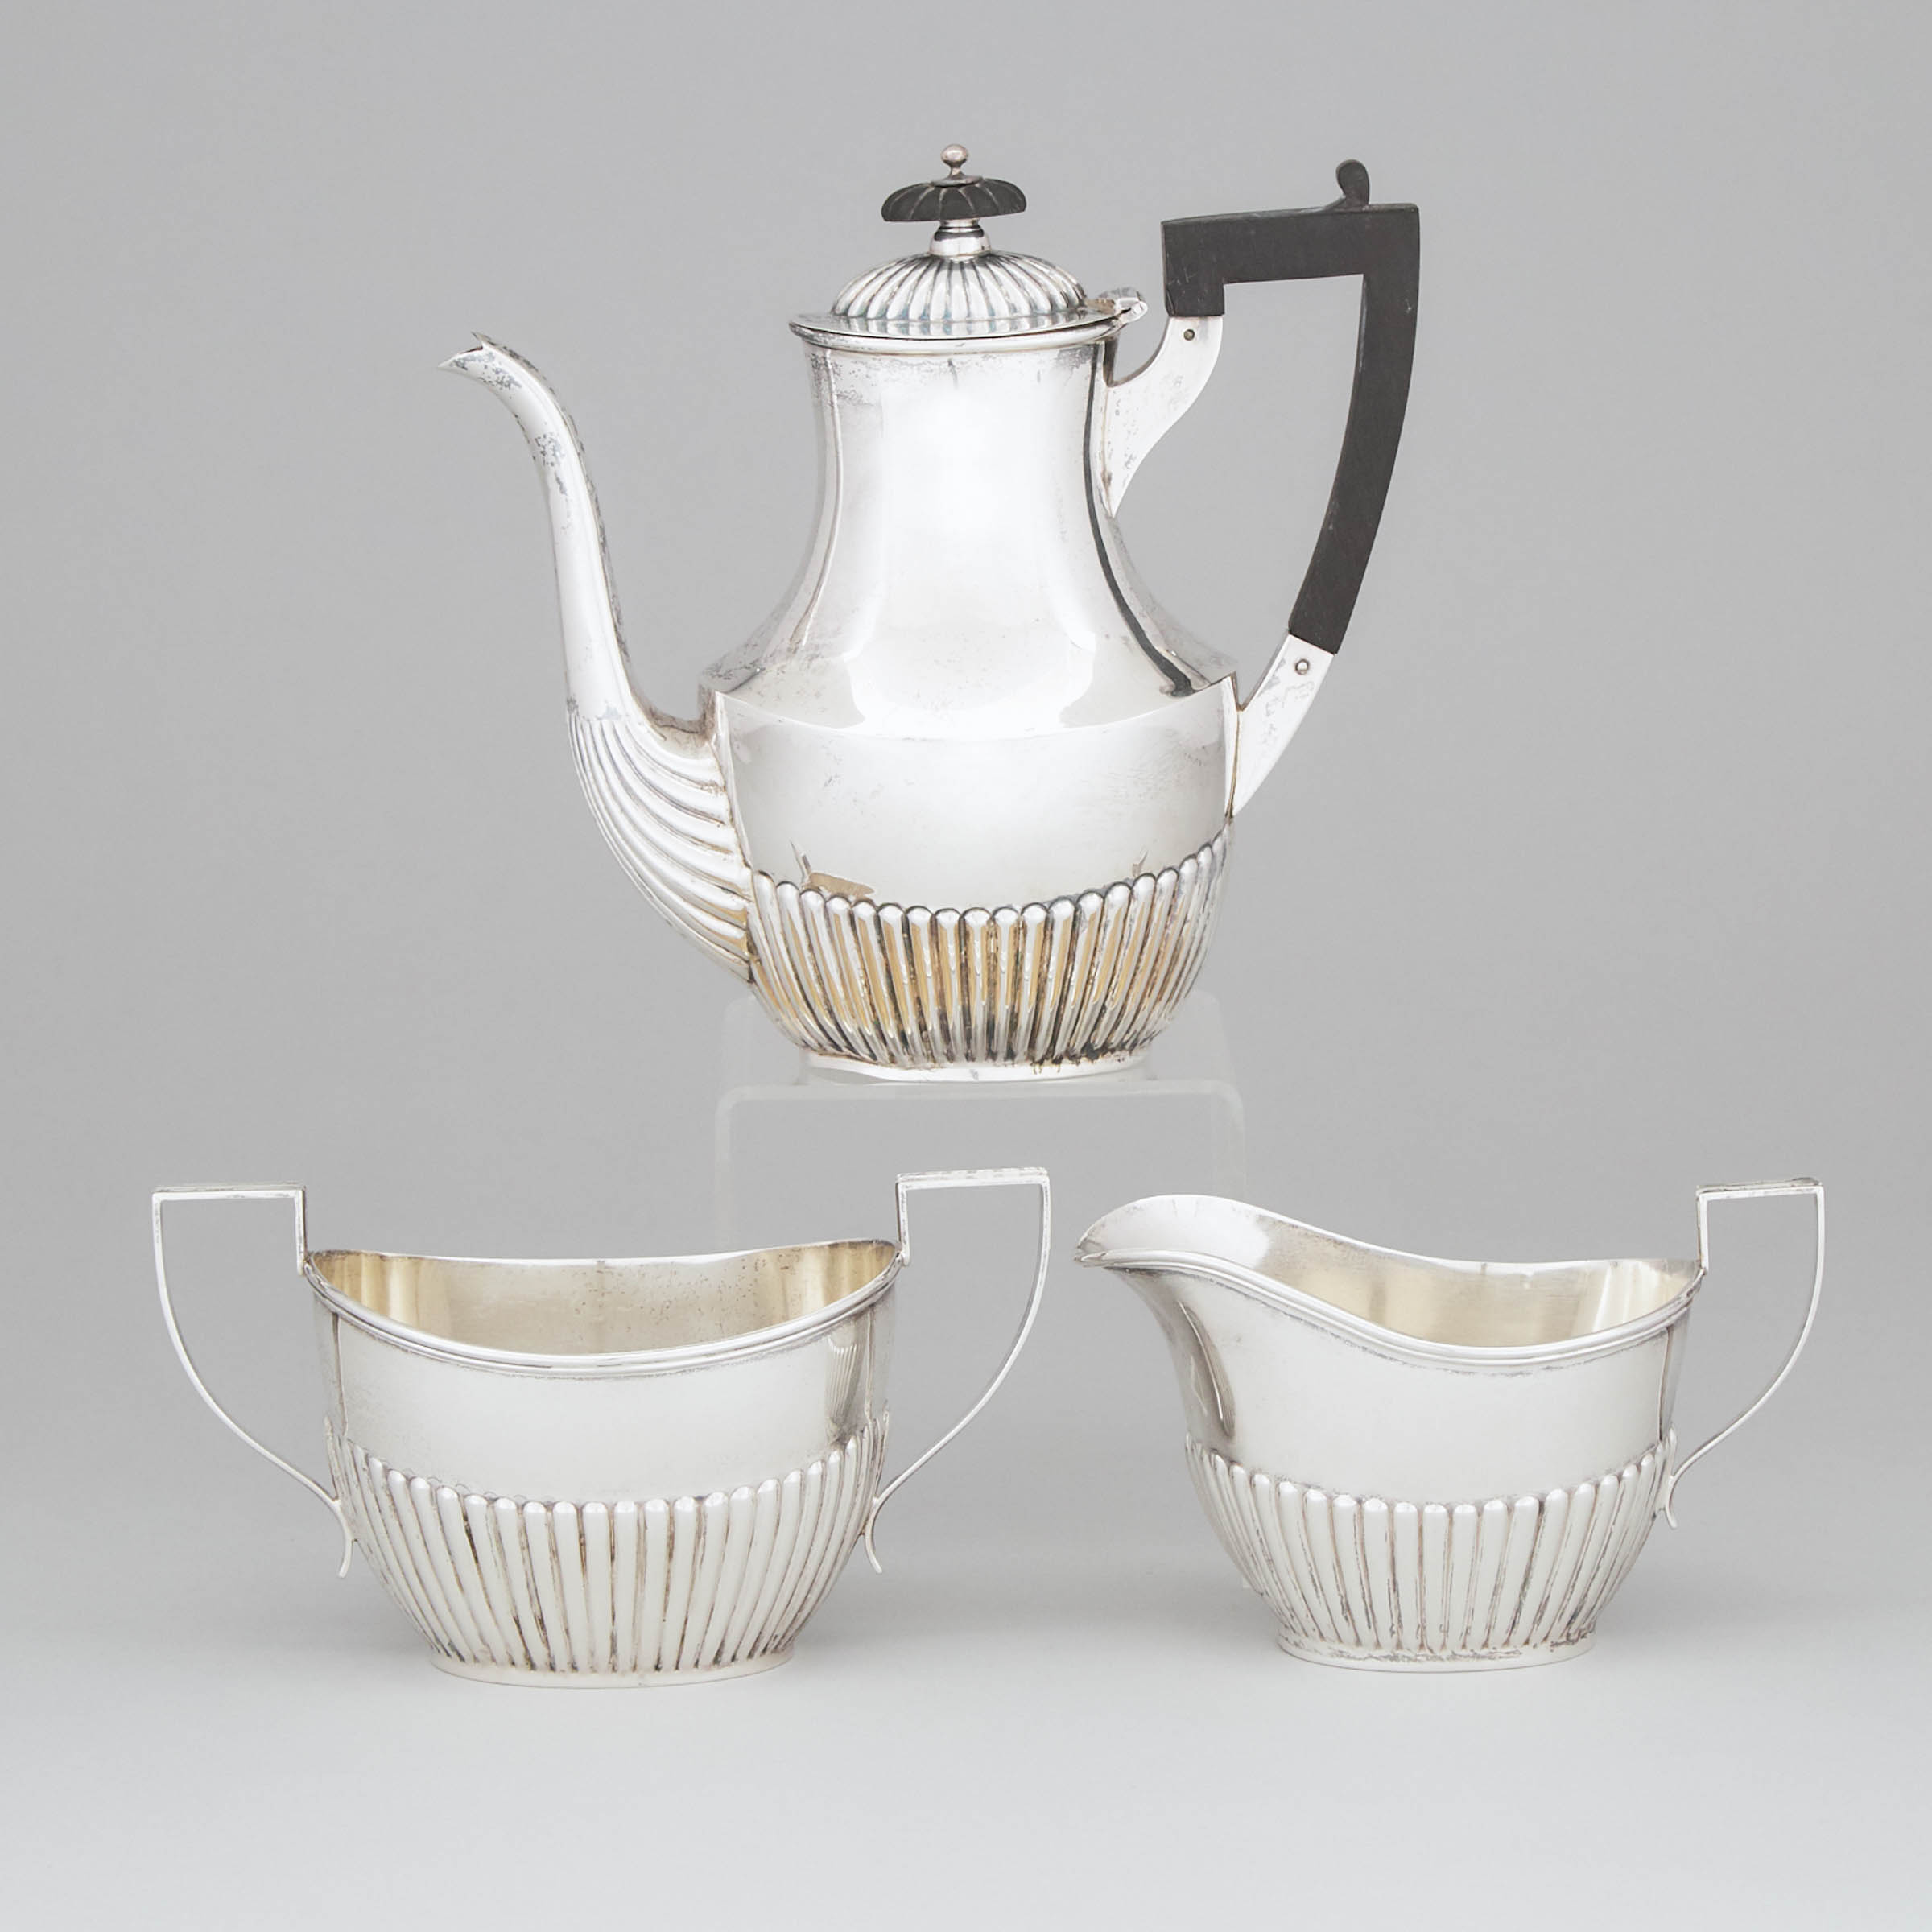 Late Victorian/Canadian Silver Assembled Coffee Service, John Round, Sheffield, 1894 and Toronto Silver Plate Co., Toronto, Ont., c.1900